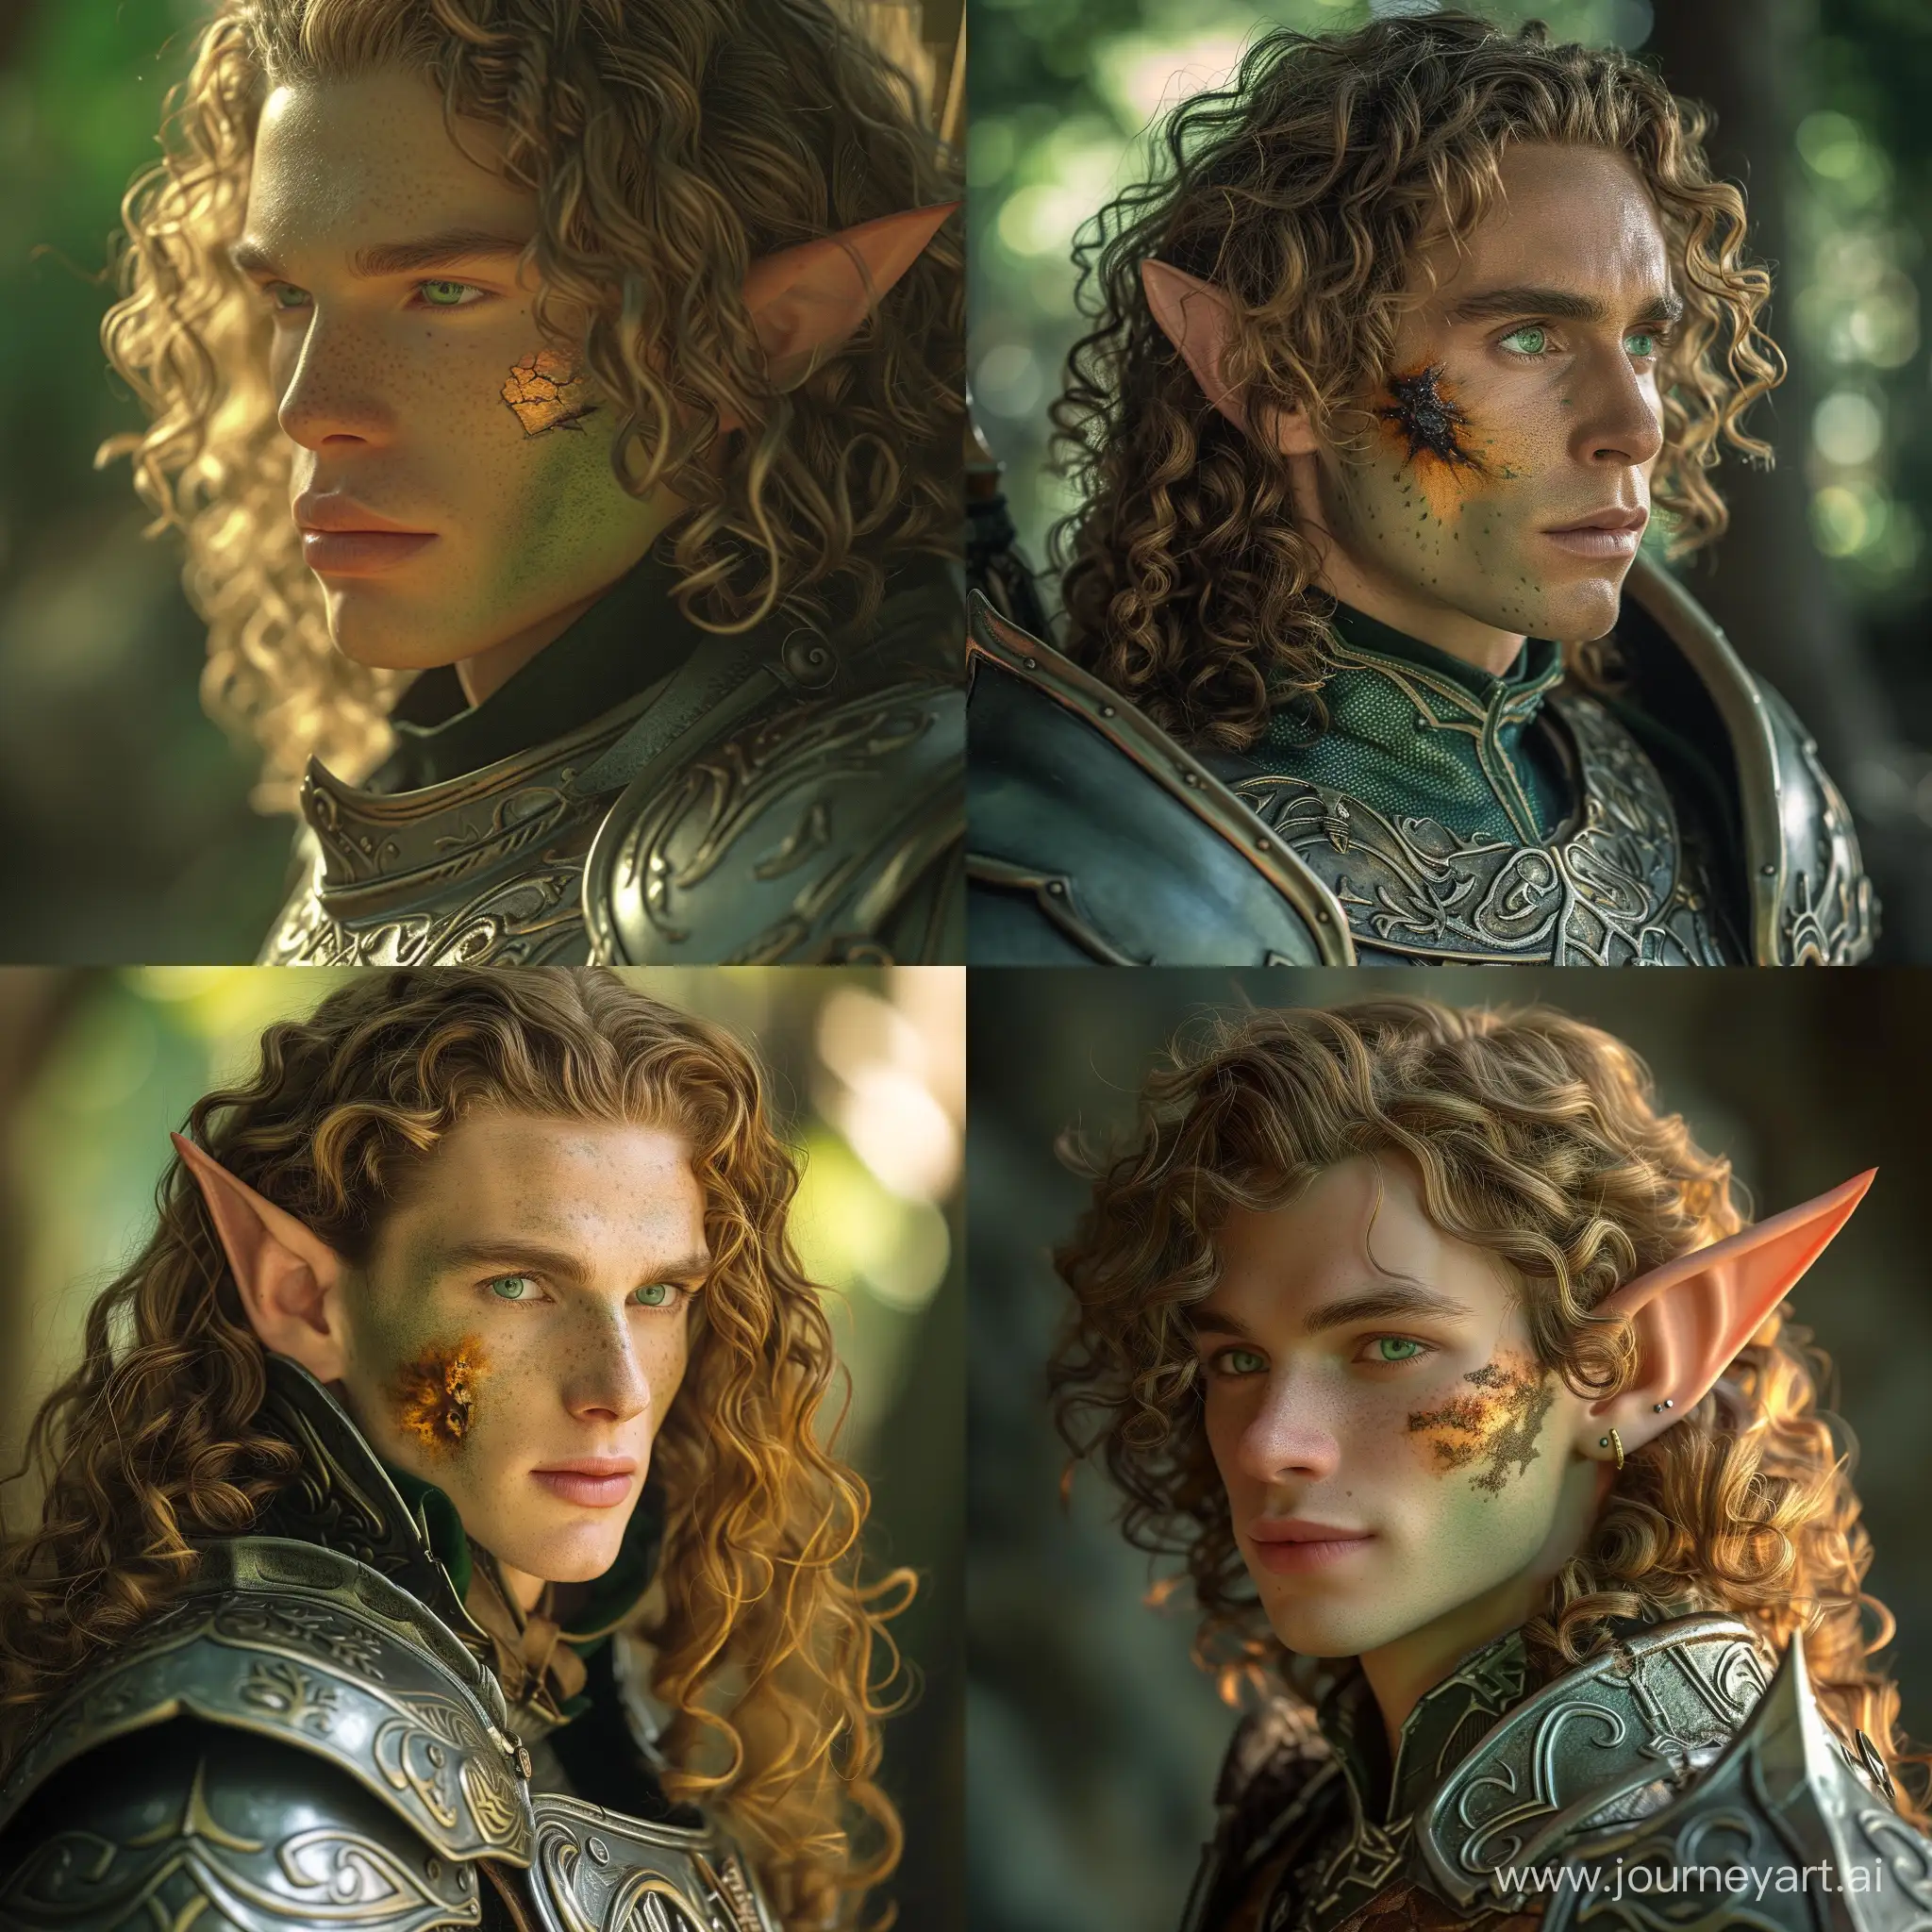 Enchanting-Wood-Elf-in-Knightly-Armor-with-Mysterious-Burn-Mark